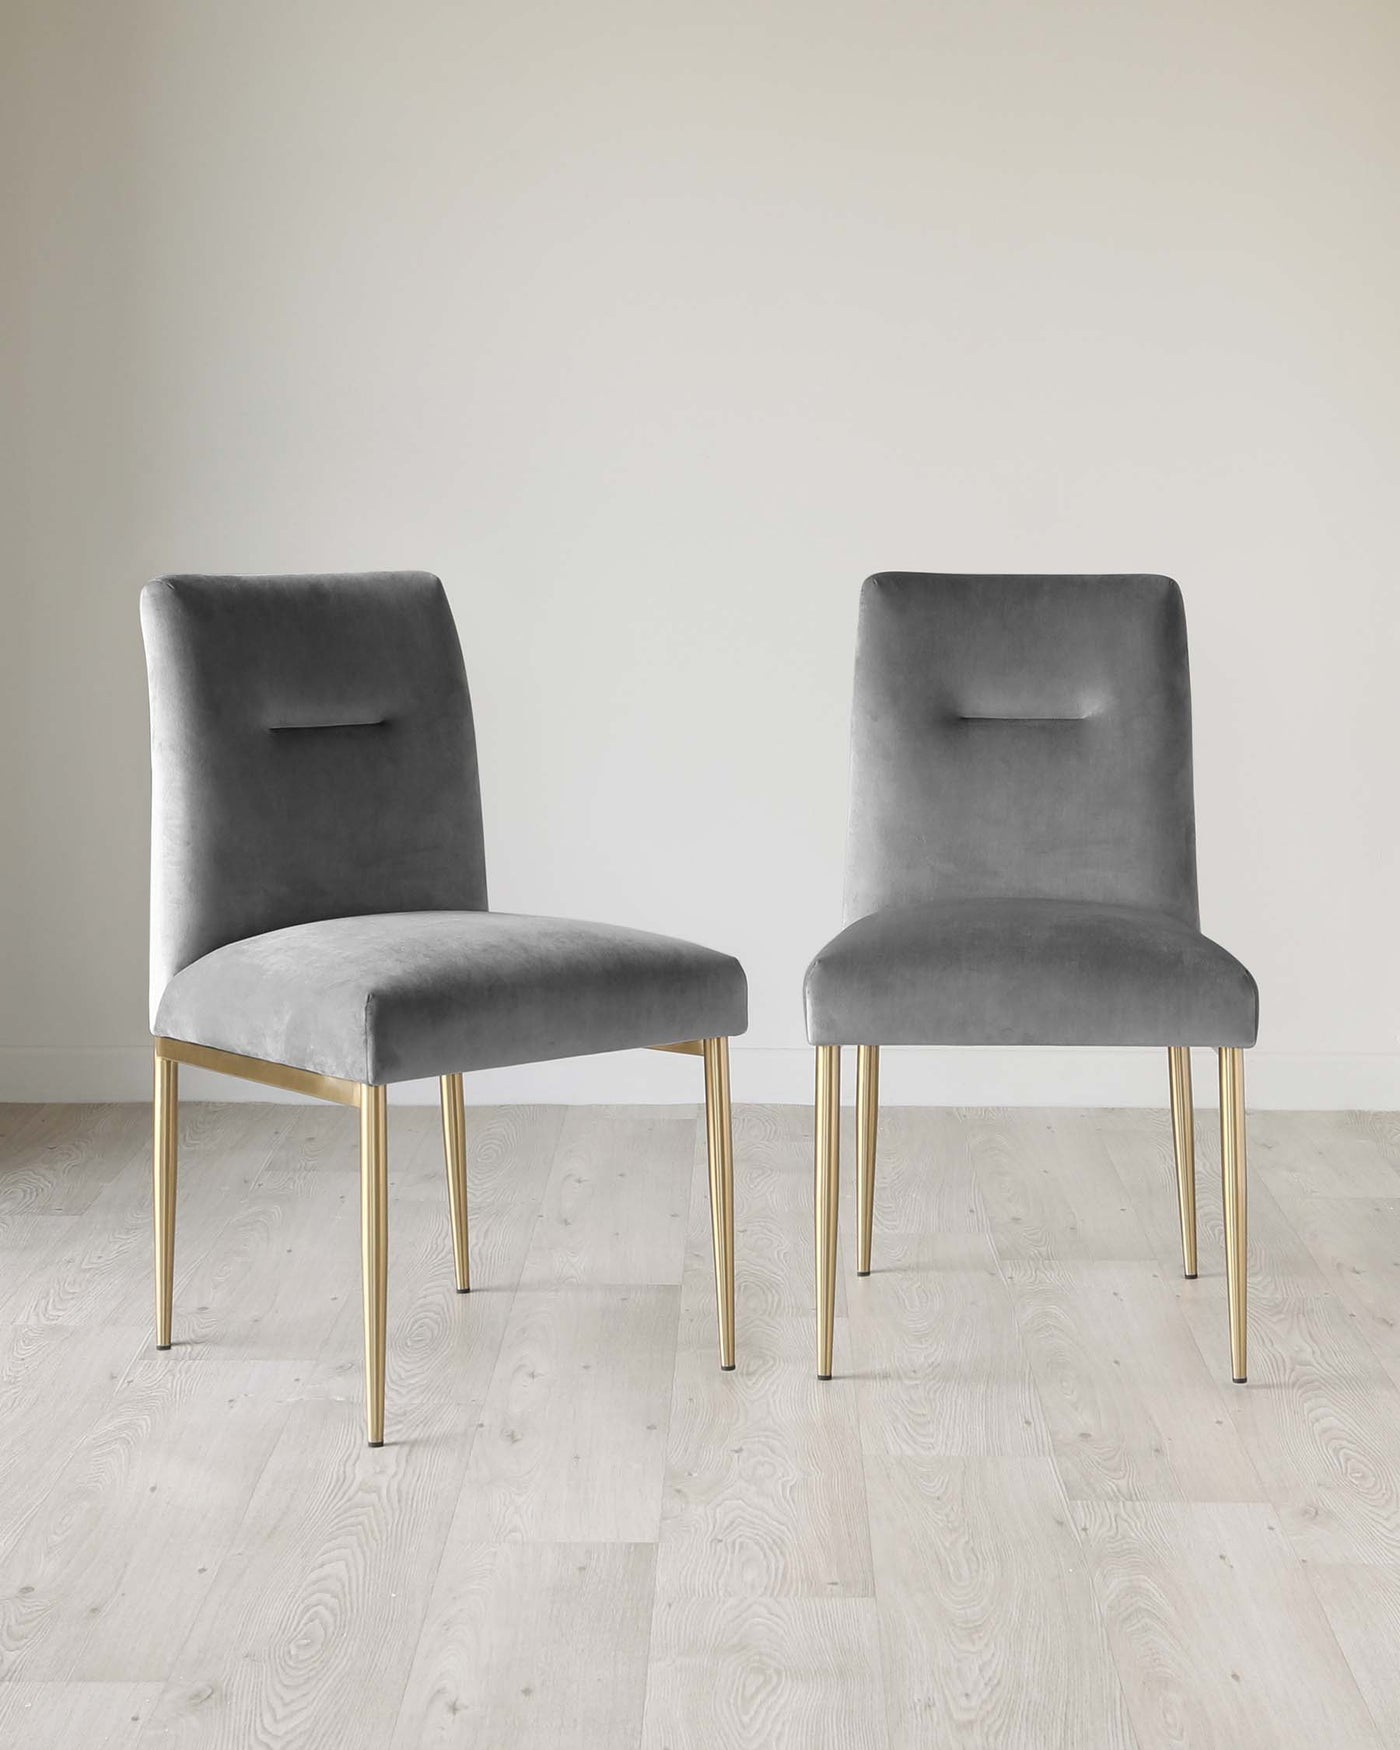 Two modern grey velvet dining chairs with sleek gold metal legs, featuring a simple and elegant design with a small cut-out detail on the backrest.